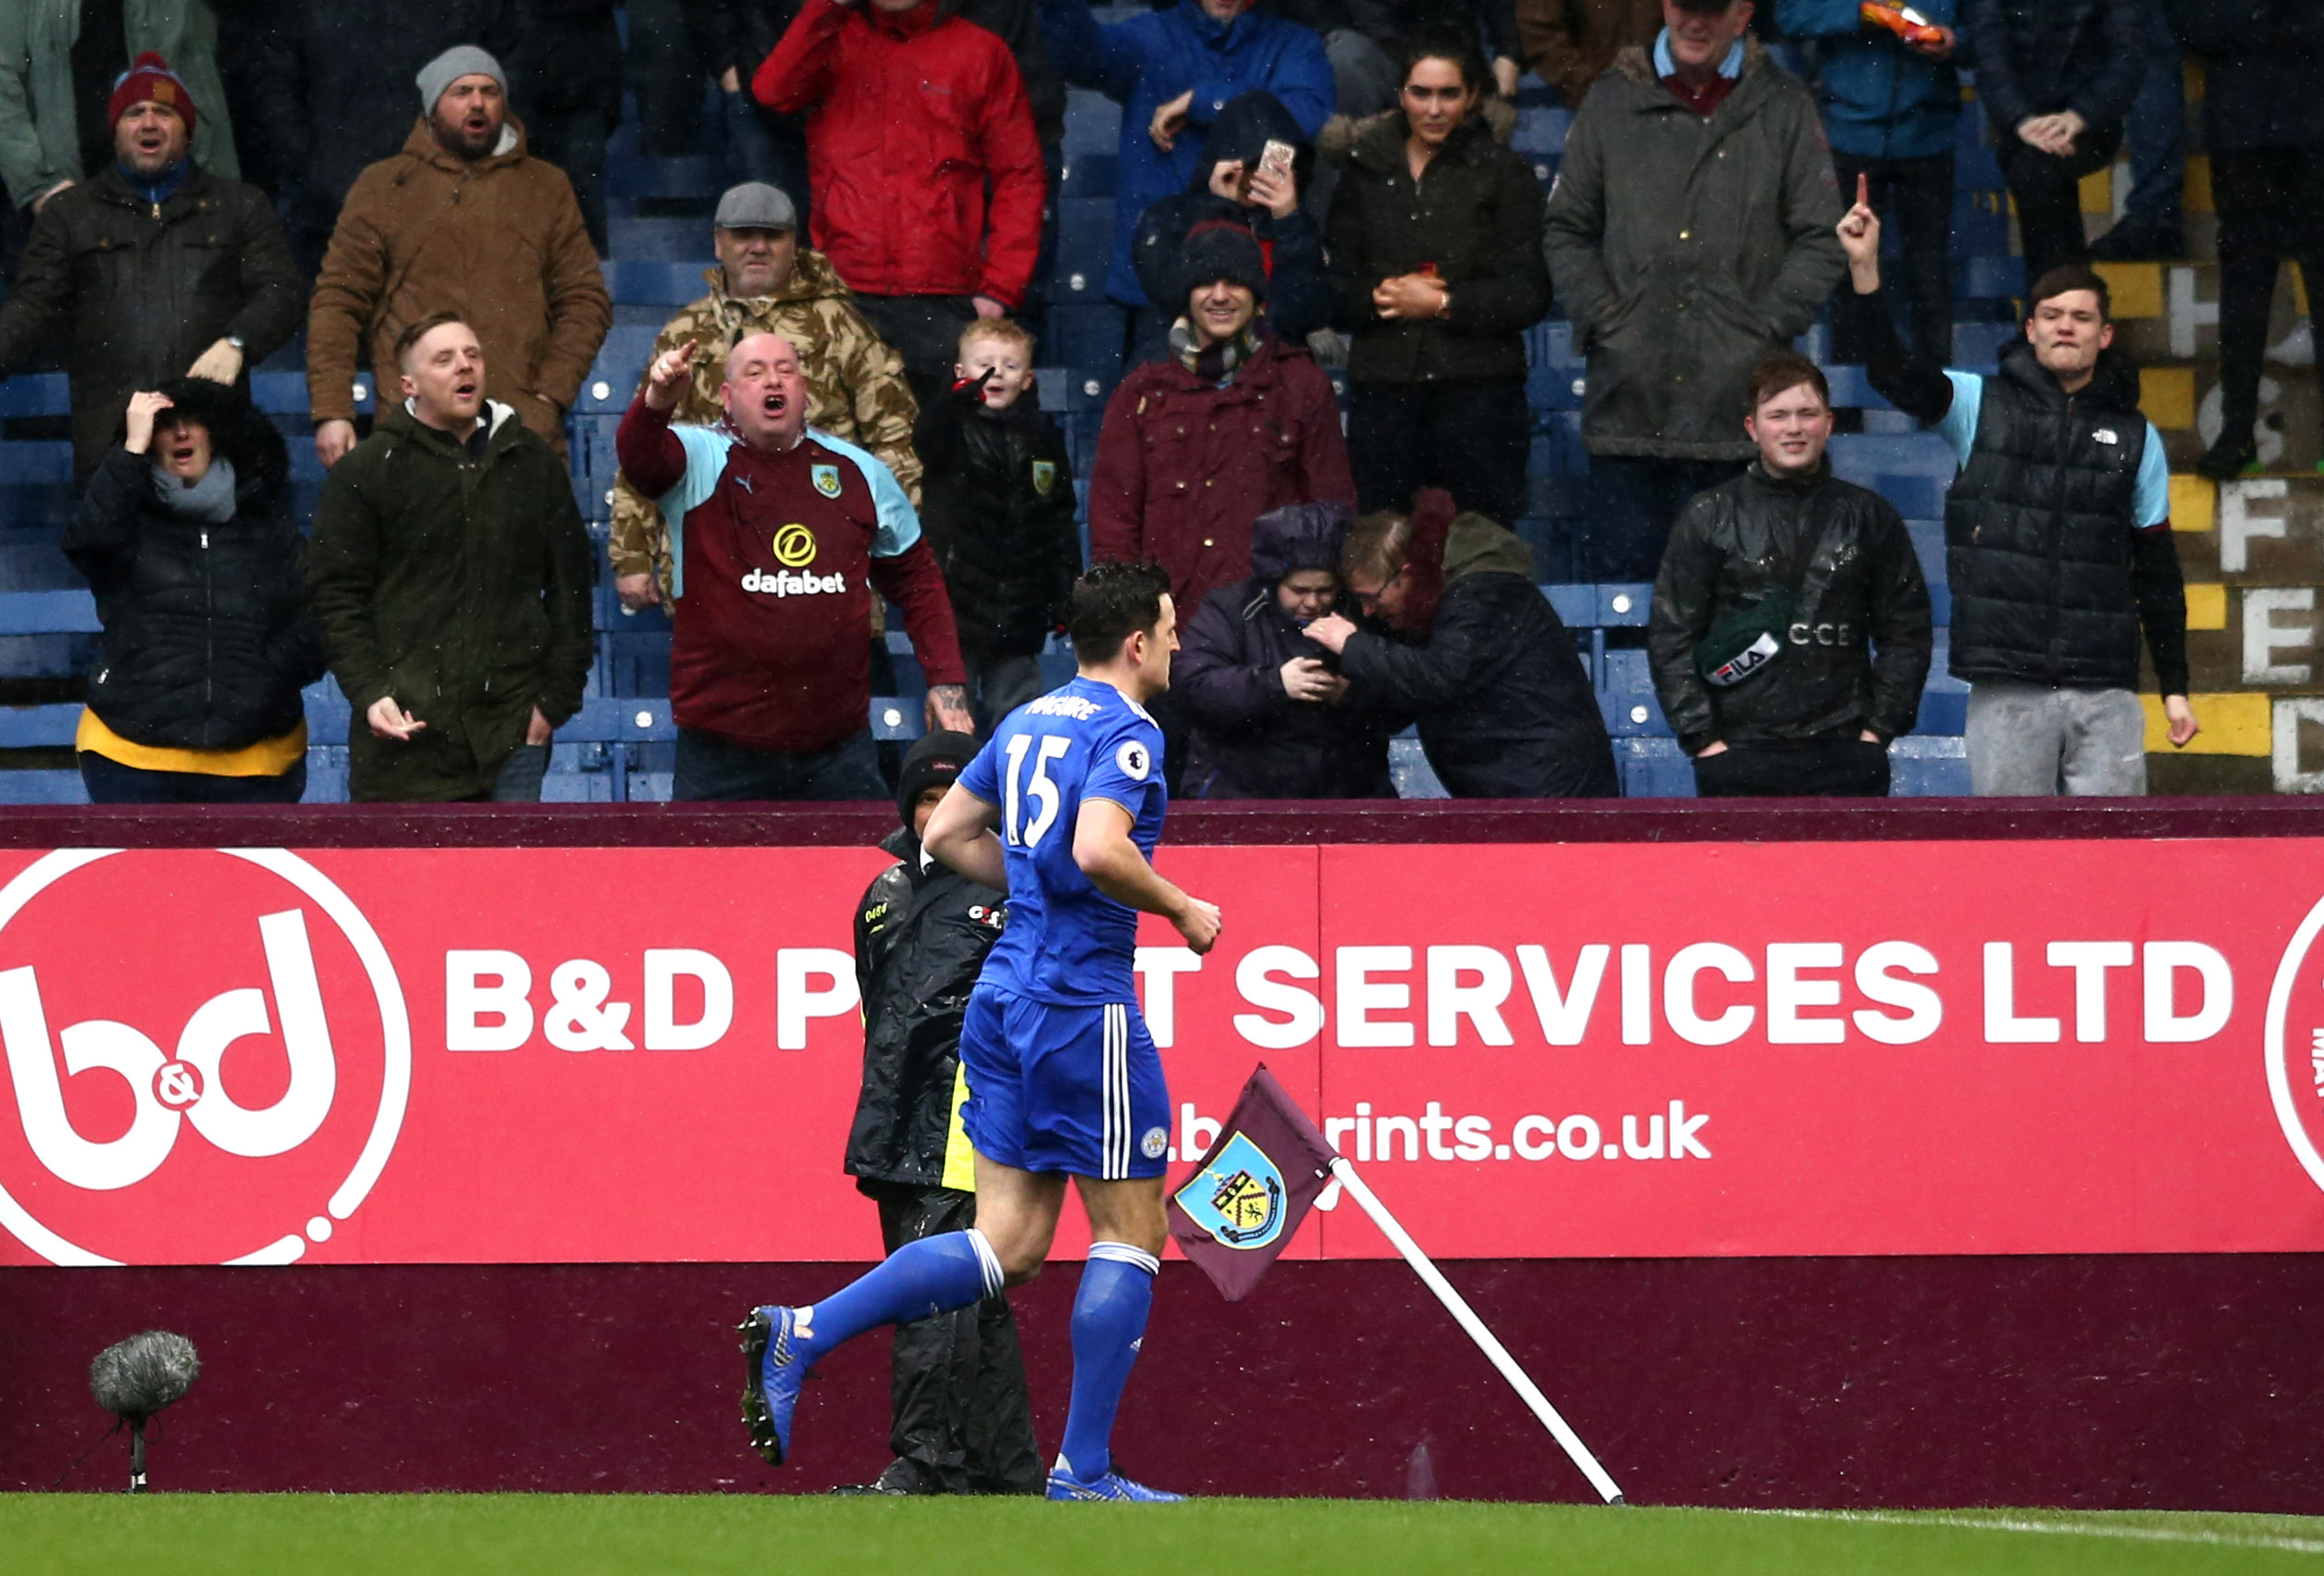 BURNLEY, ENGLAND - MARCH 16: Harry Maguire of Leicester City walks off the pitch after being sent off during the Premier League match between Burnley FC and Leicester City at Turf Moor on March 16, 2019 in Burnley, United Kingdom. (Photo by Jan Kruger/Getty Images)